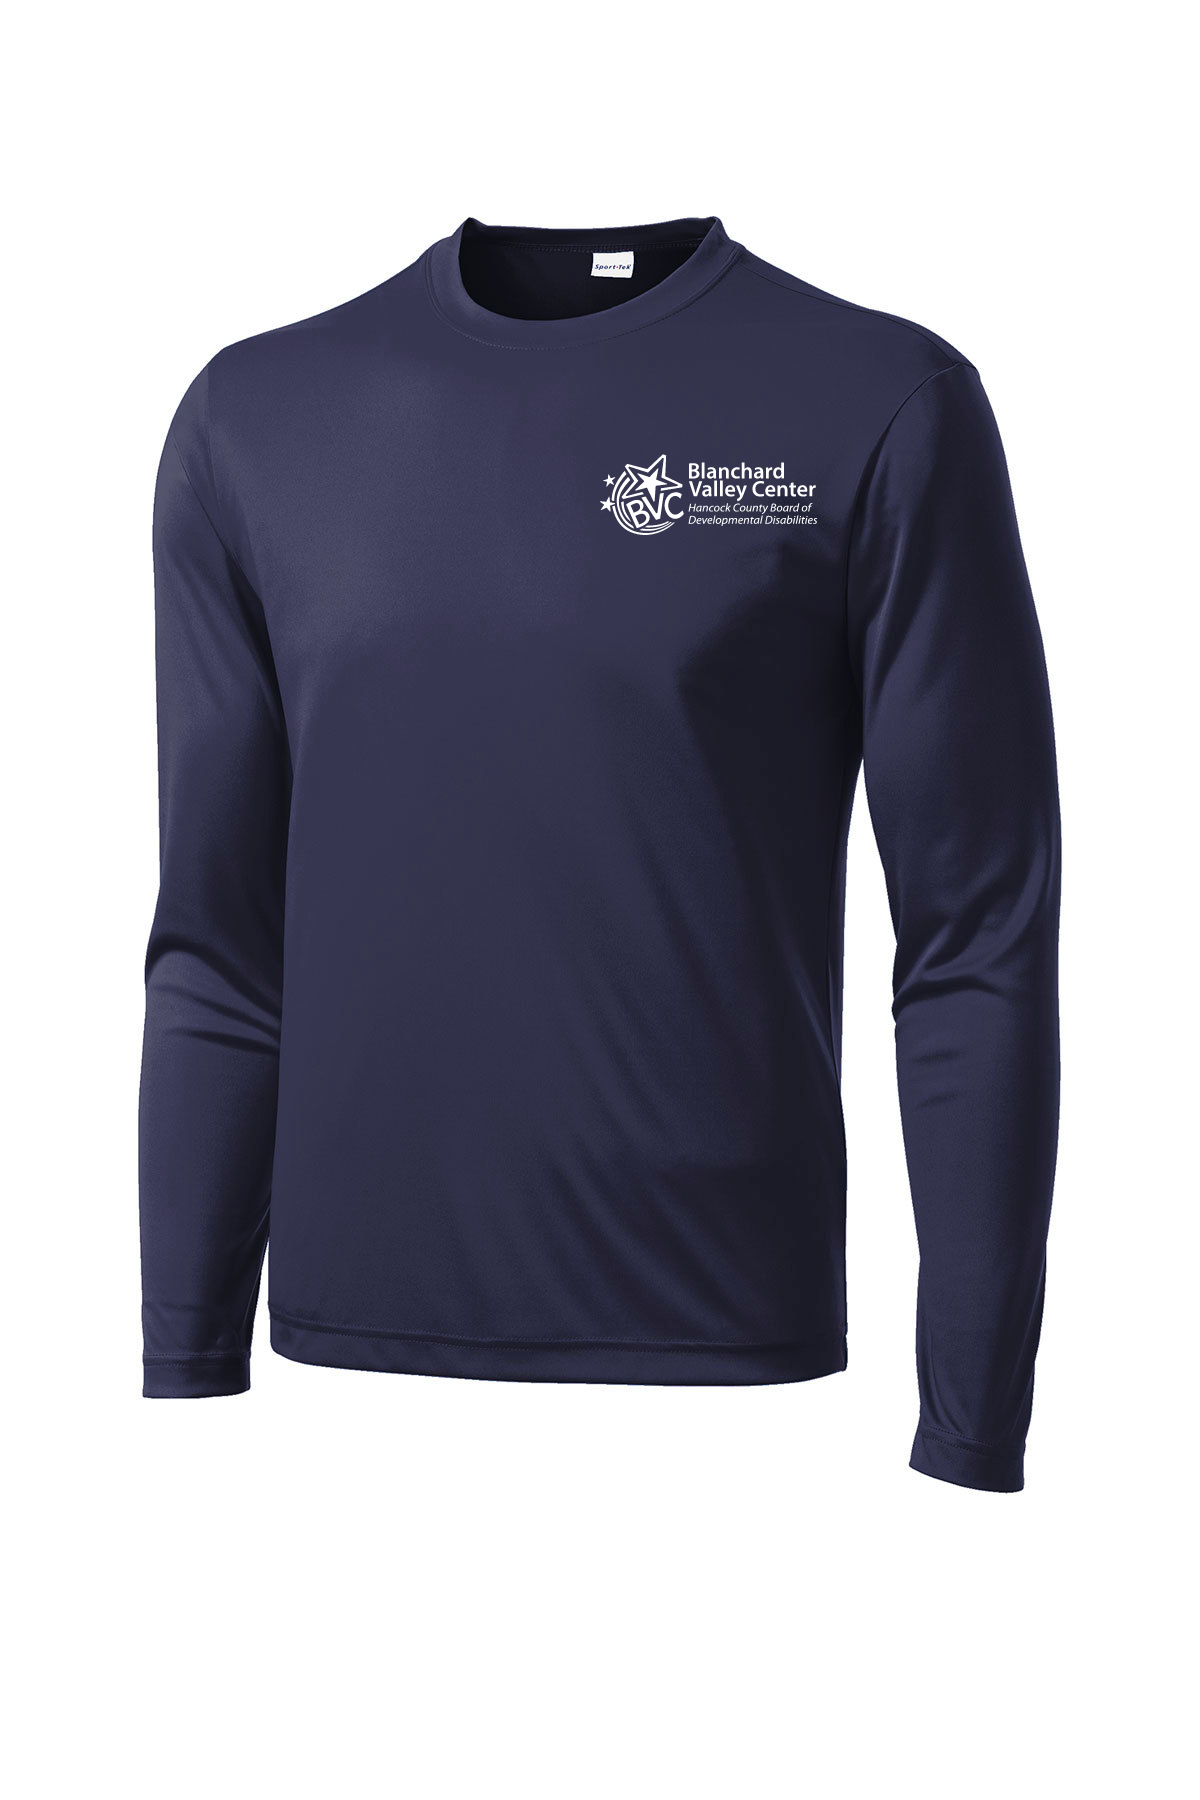 Blanchard Valley Center Athletic Long Sleeve Tee